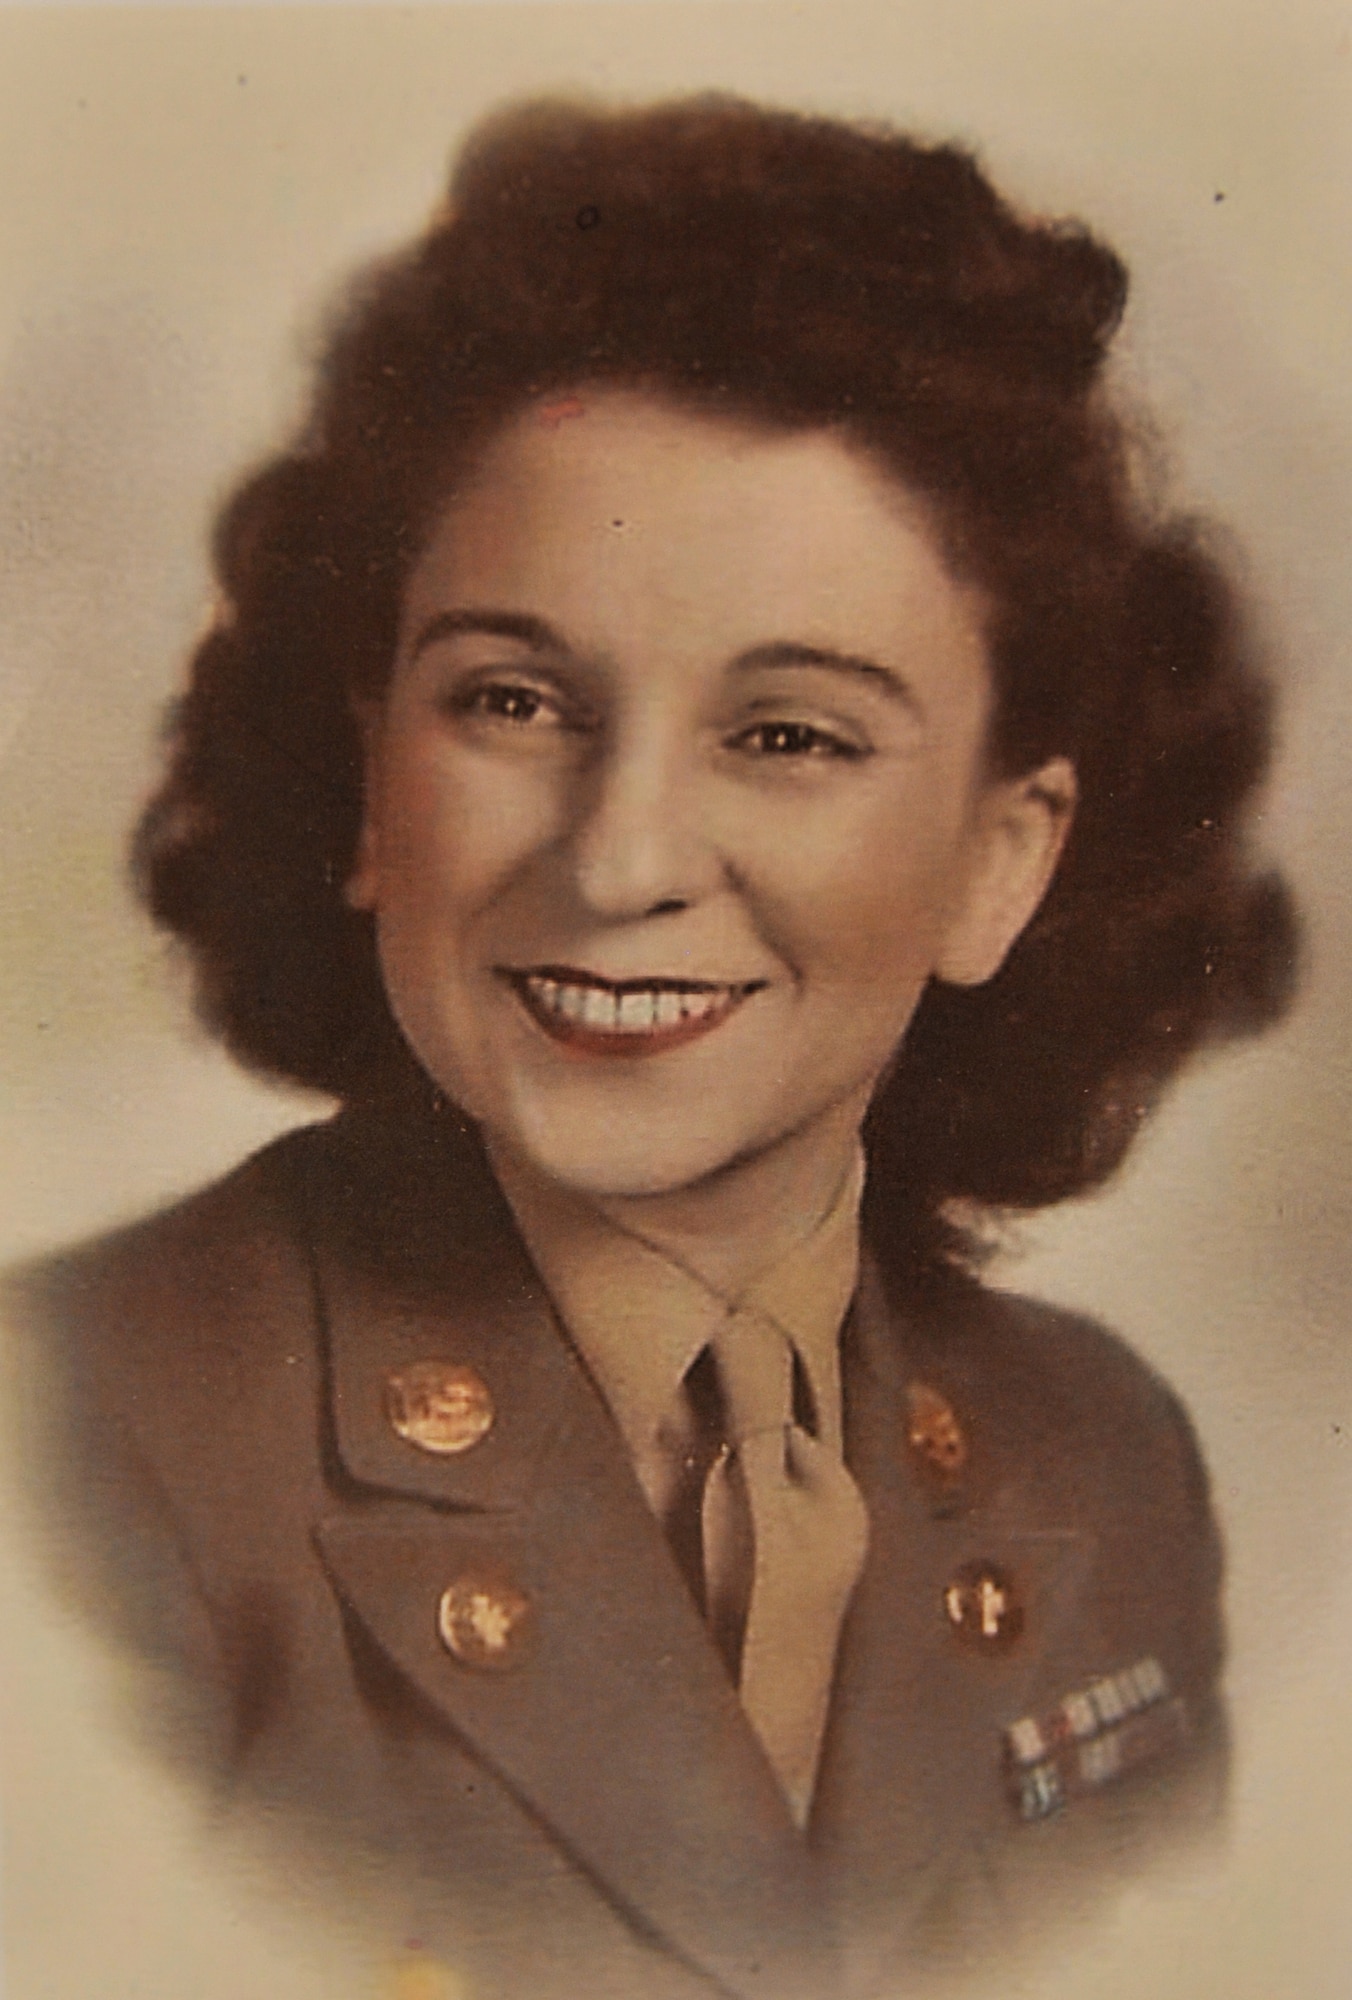 Josephine Keim, who served 20 years in the Women's Army Auxiliary Corps, the Women's Army Corps, and eventually the Air Force before retiring as a technical sergeant in 1963, is preparing to celebrate her 100th birthday July 15. She currently lives in the local Maxwell Air Force Base, Ala, area where she had been stationed several times. (Courtesy photo)